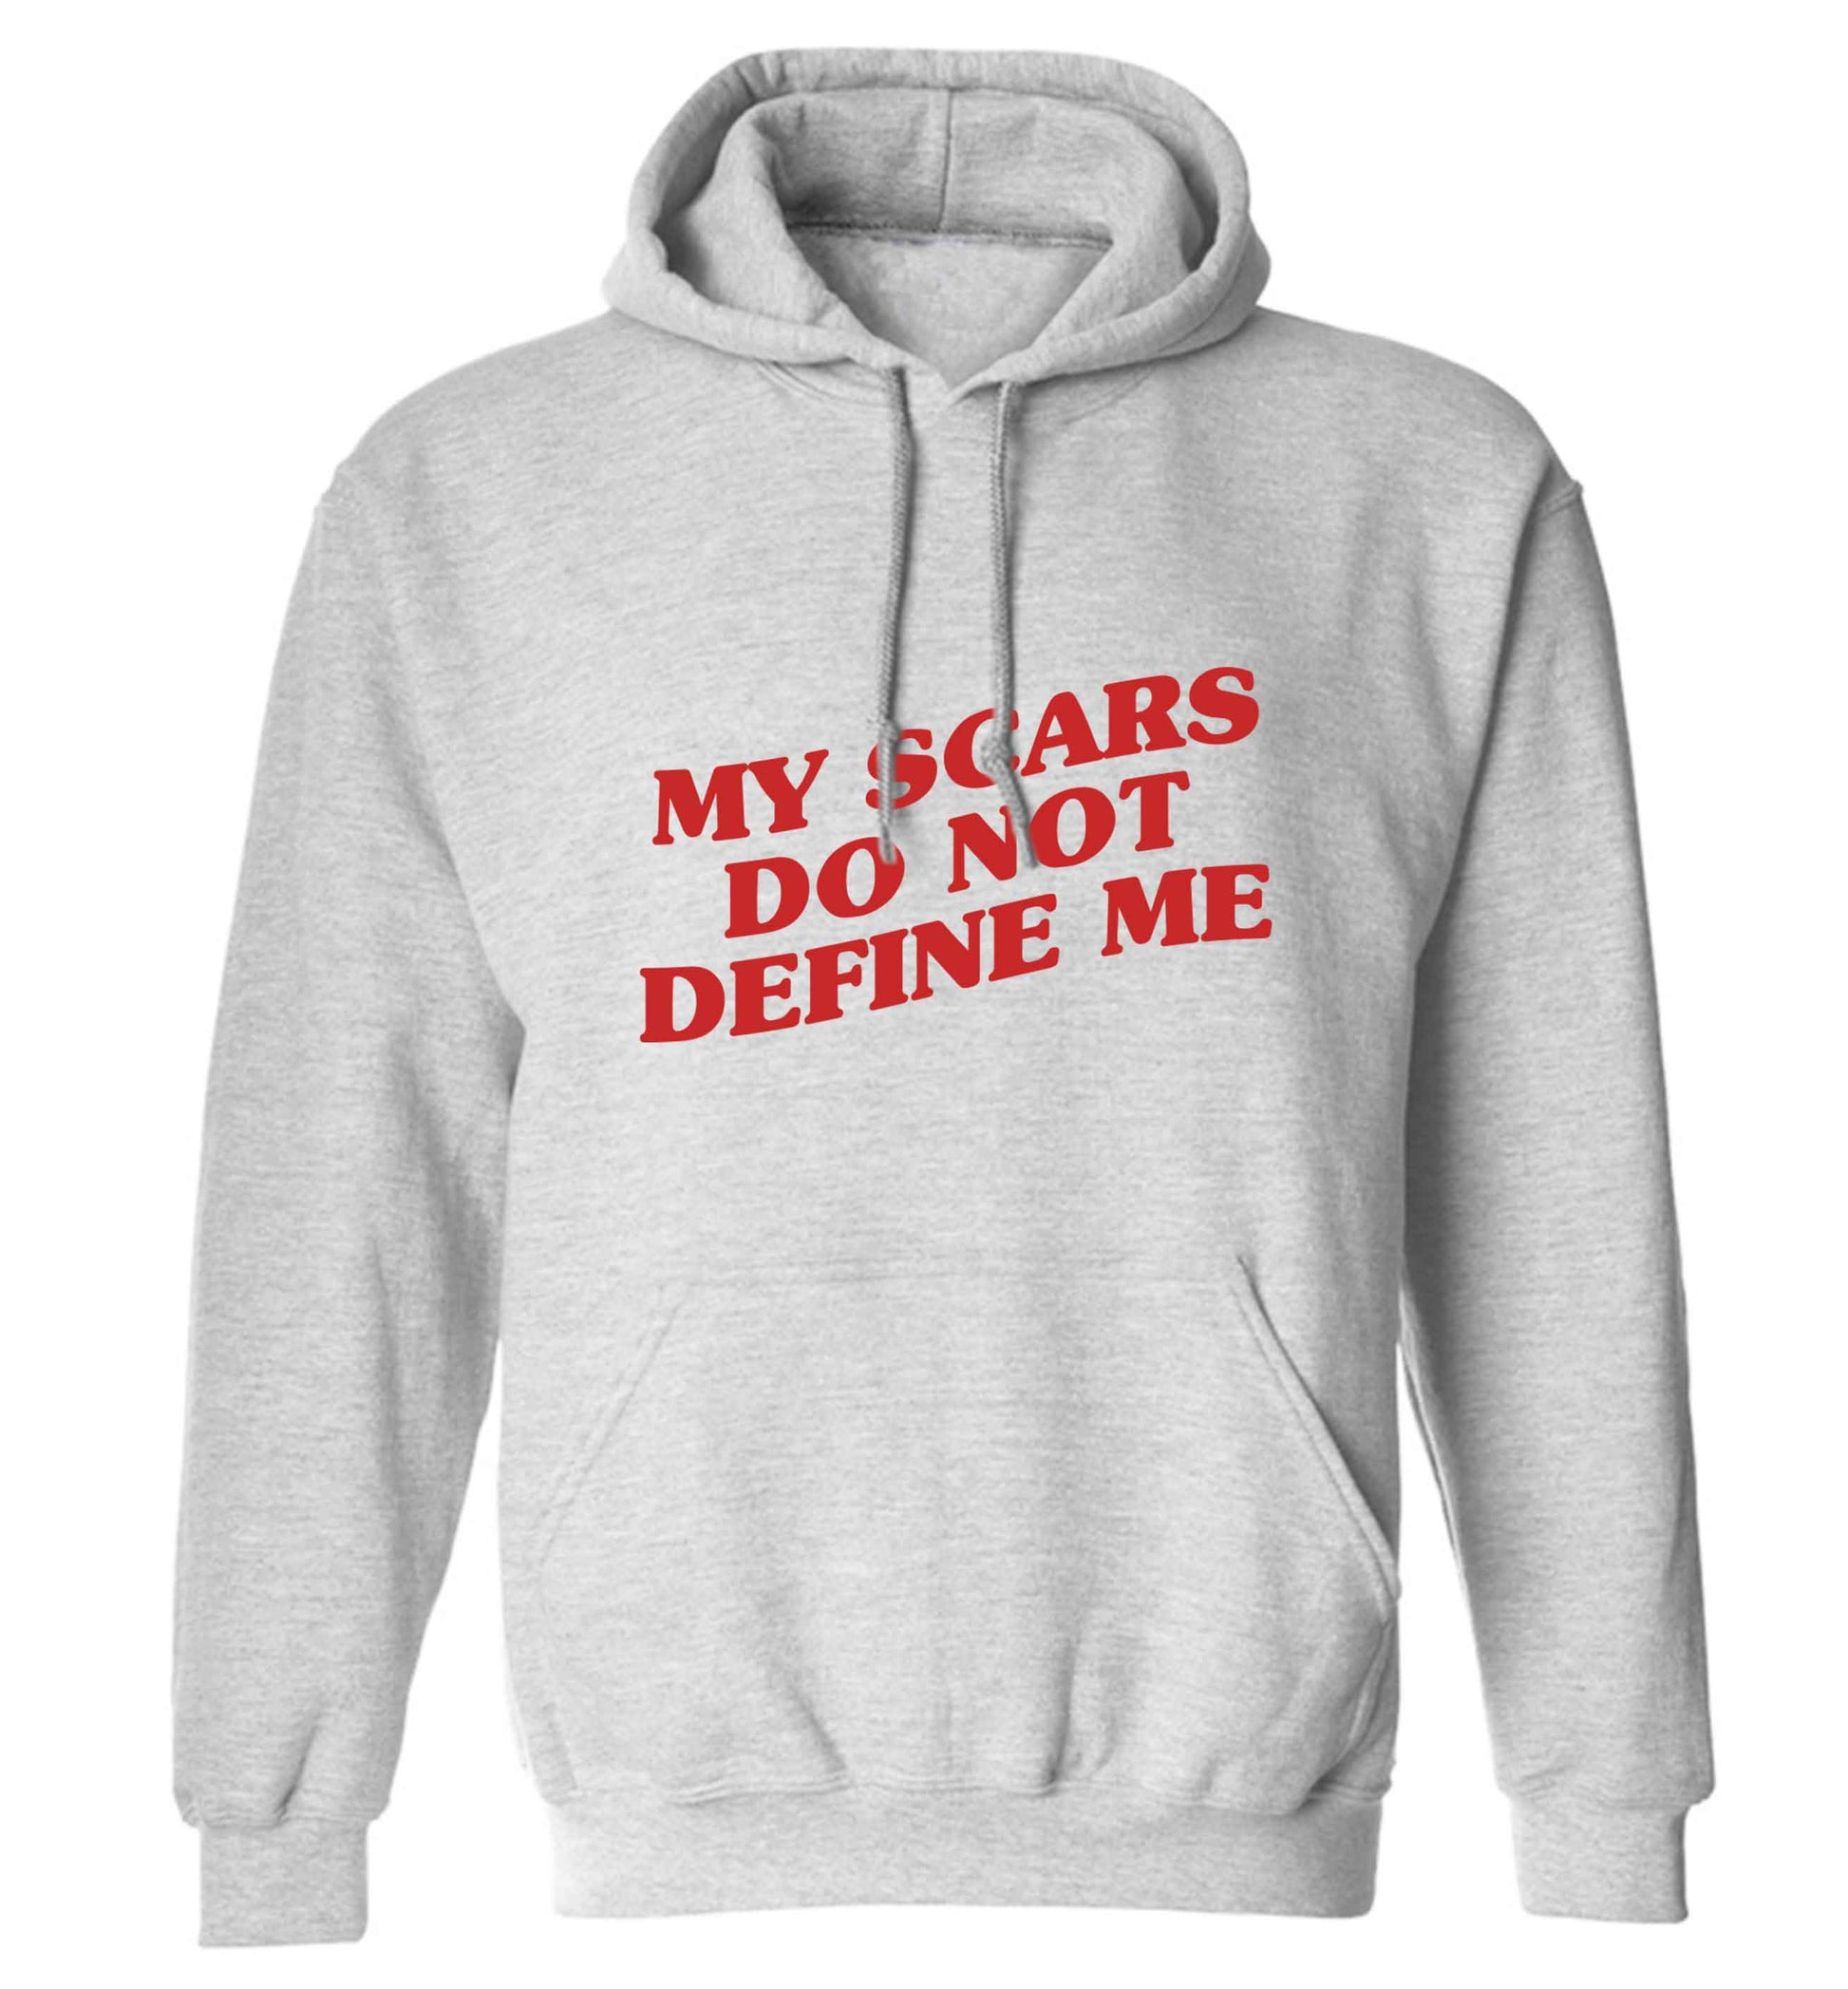 My scars do not define me adults unisex grey hoodie 2XL